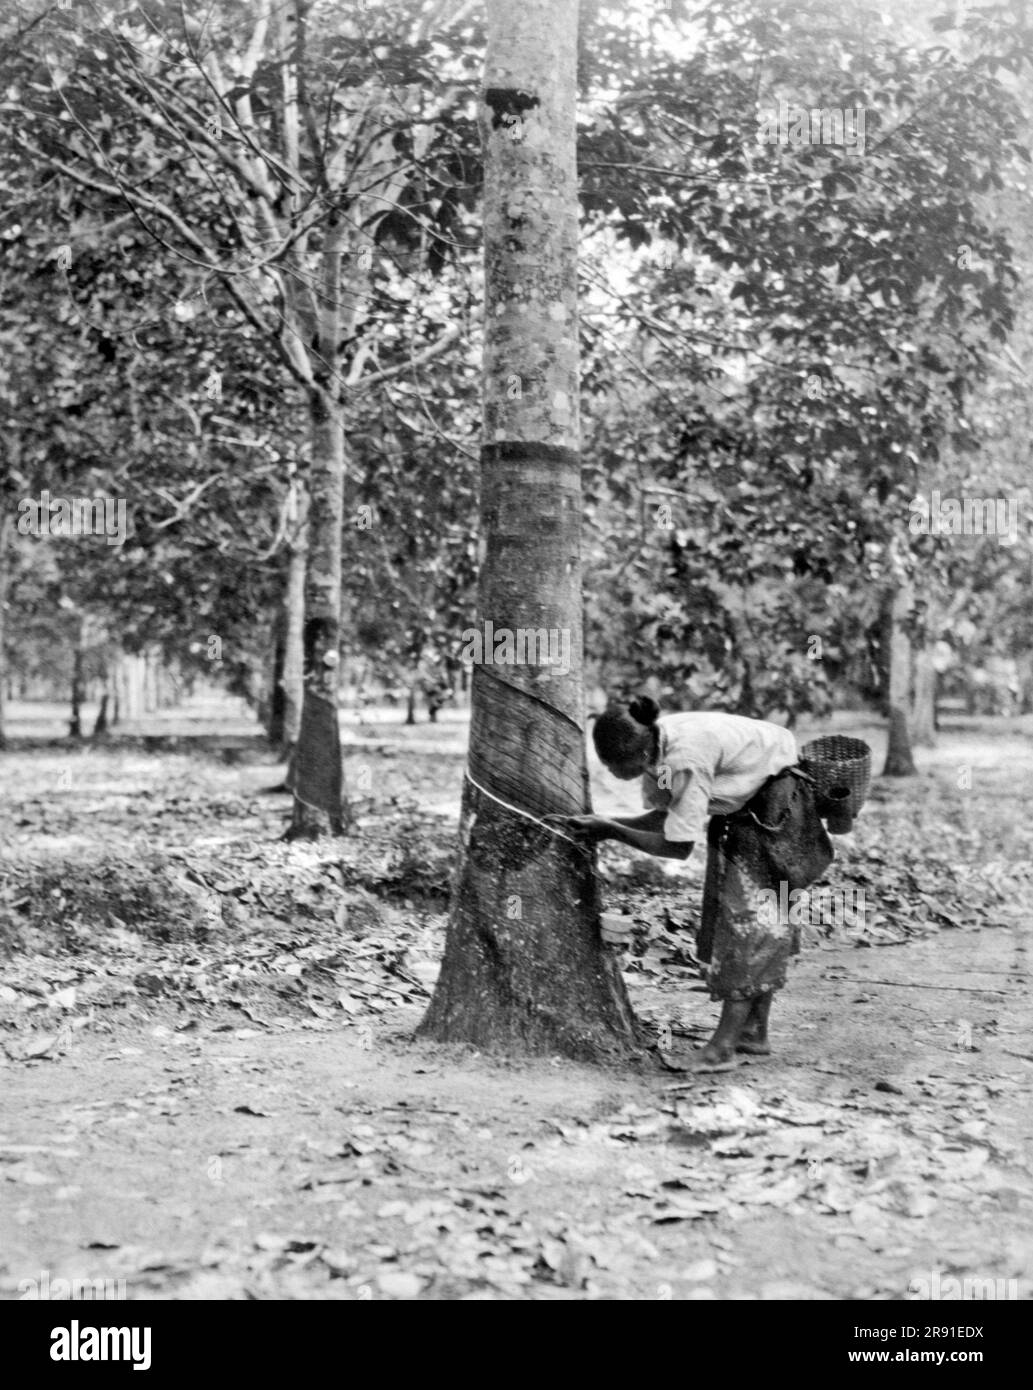 Sumatra, Dutch East Indies:  October 22, 1940. A native woman tapping a rubber tree on a plantation in Sumatra. Stock Photo